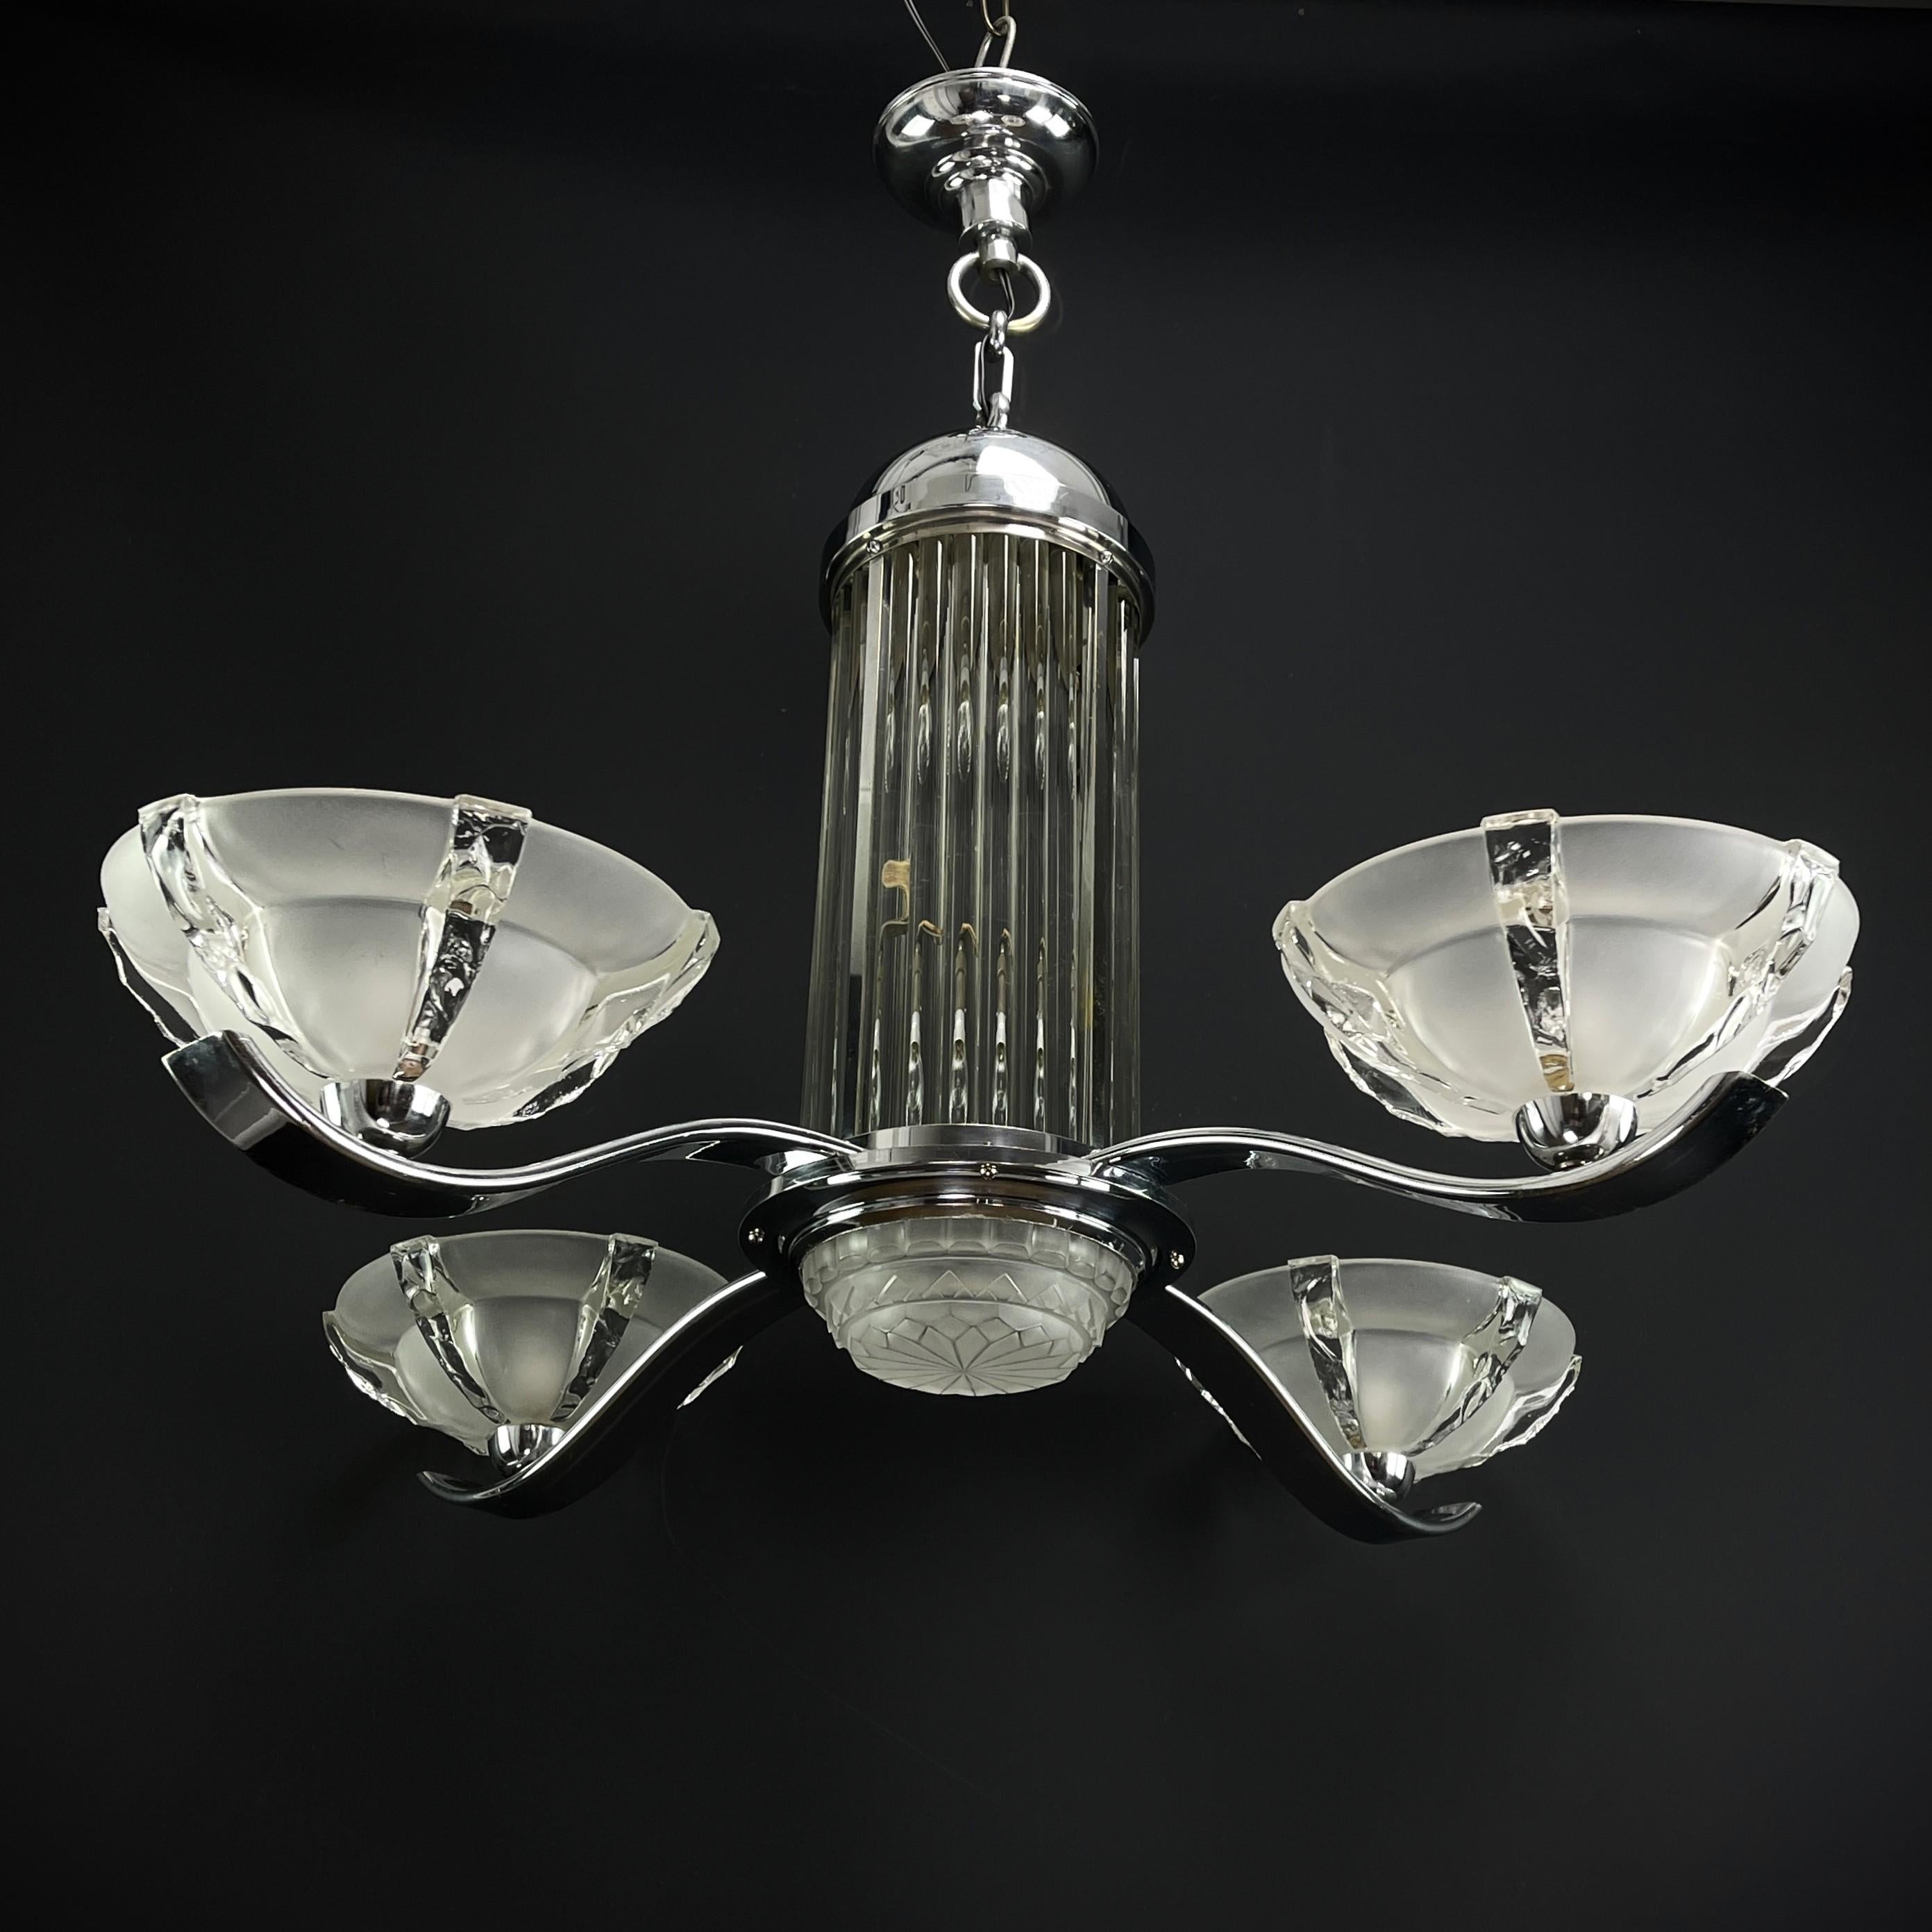 Art Deco chandelier - Pretitot and EZAN - 1930s

This rare, original pendant lamp impresses with its simple and functional Art Deco design. The lamp provides a very pleasant light. This ceiling lamp is an absolute design classic from the ART DECO